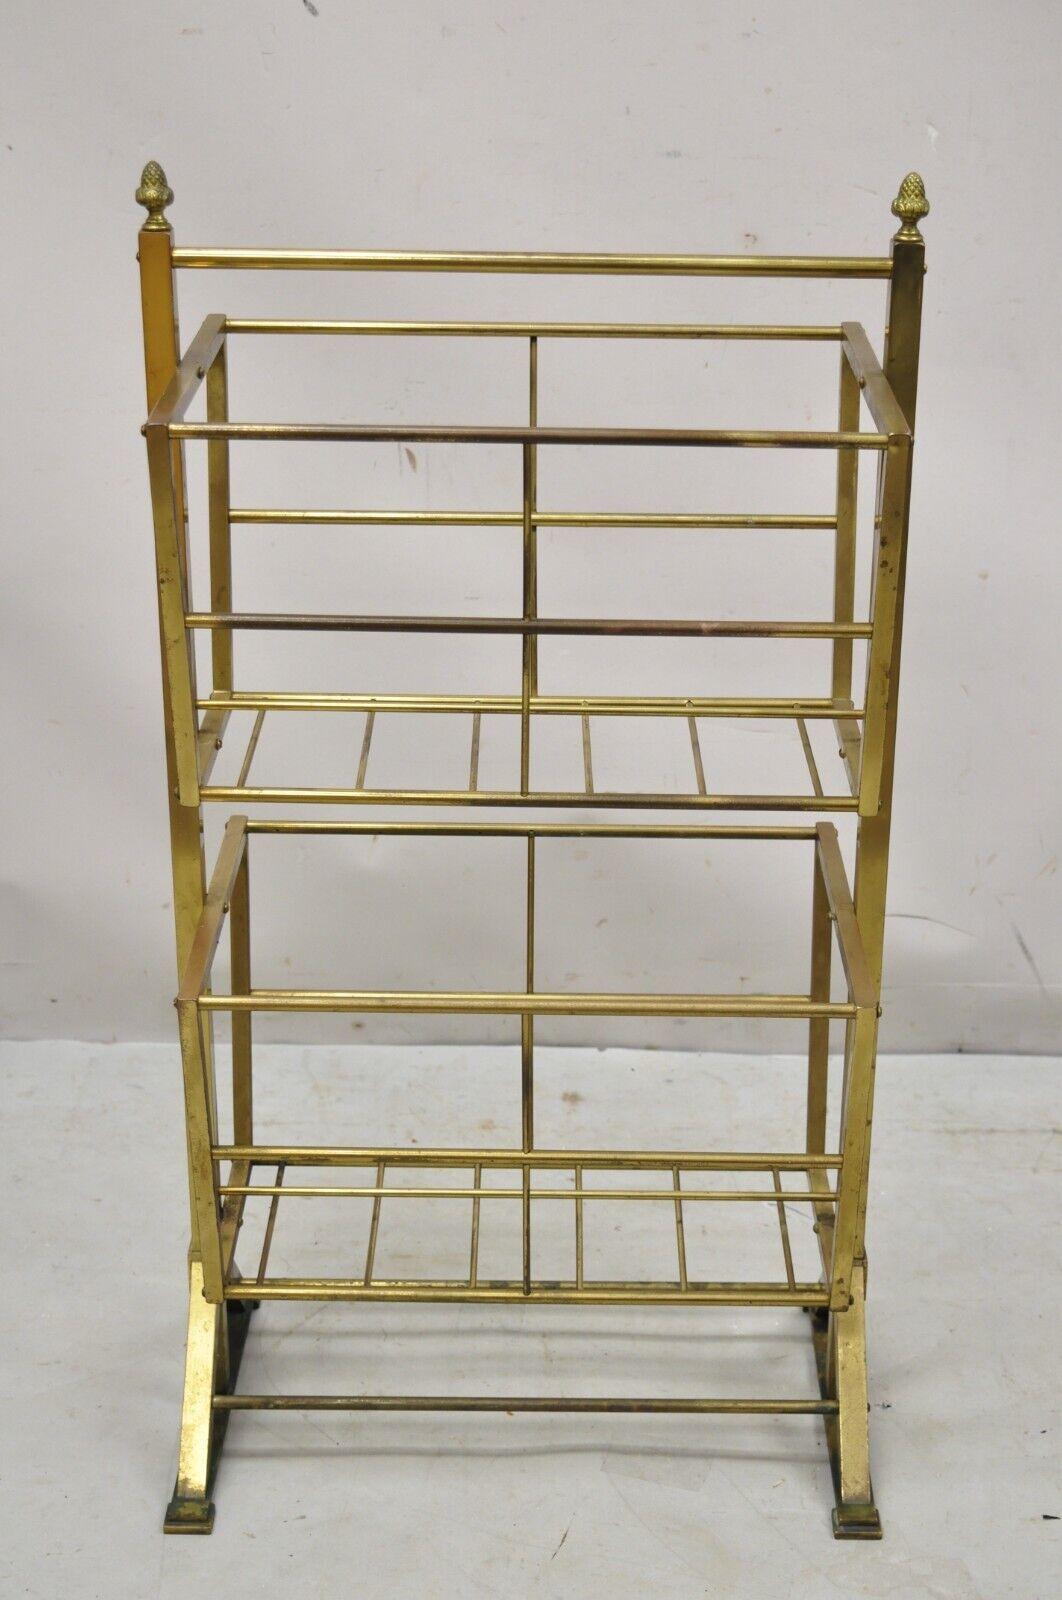 Vintage Mid-Century Modern brass frame 2 tier magazine rack stand. Item features a (2) tier design, brass frame, very nice vintage item, clean modernist lines, great style and form. Circa mid-20th century. Measurements: 34.5